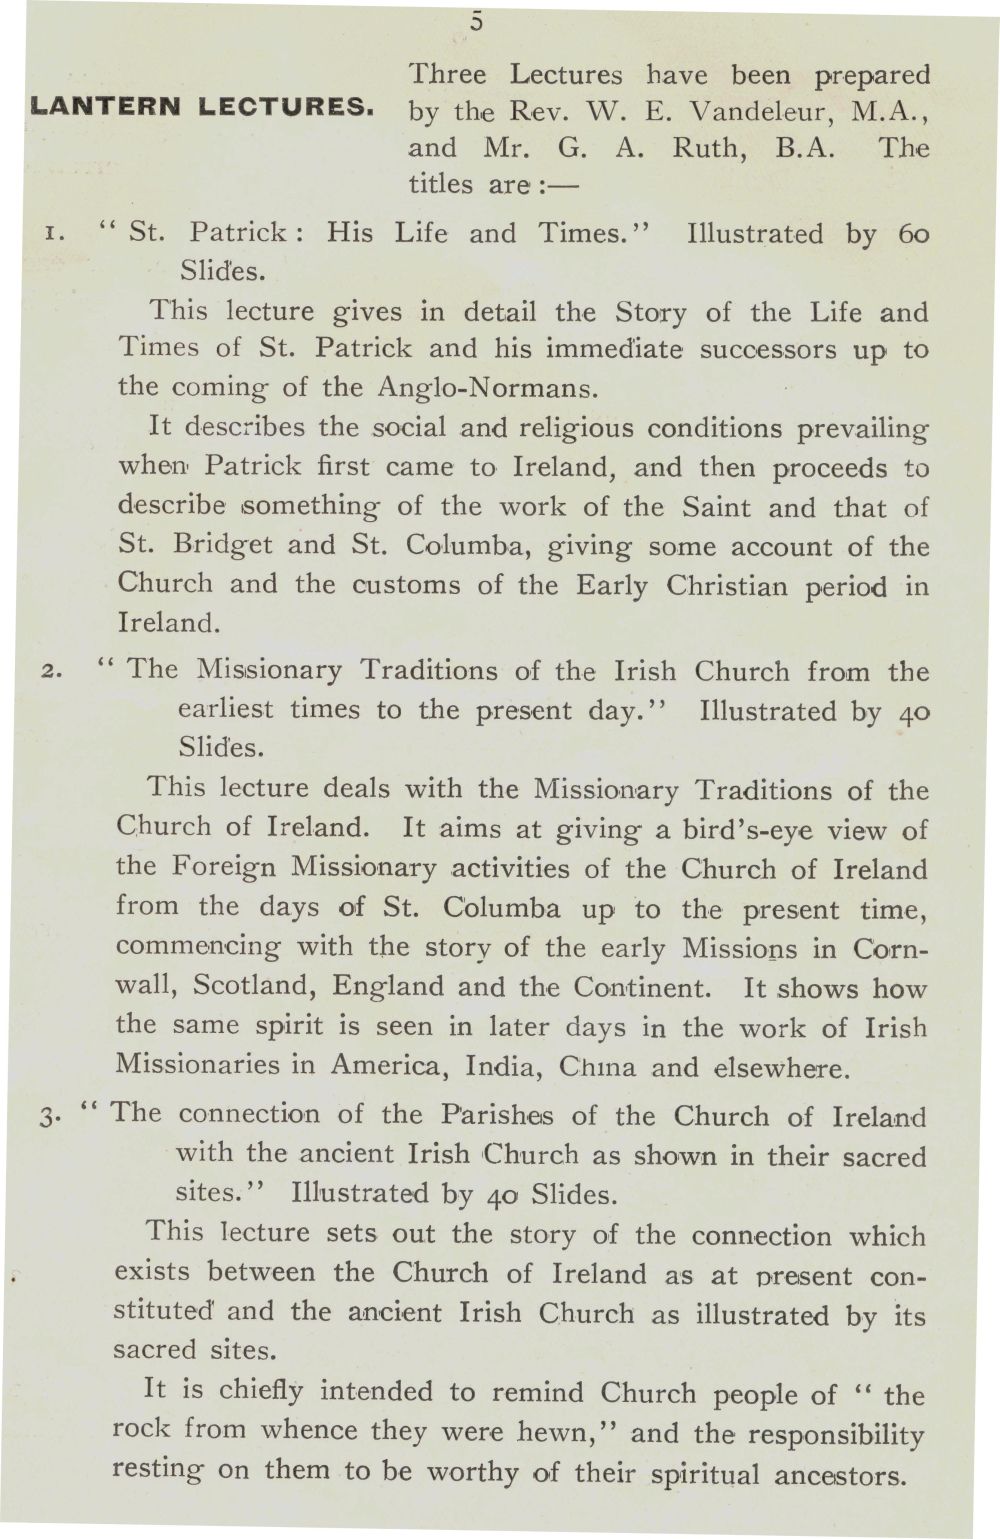 Detail about the lantern lectures as advertised in A Handbook of Celebrations, Lectures and Literature (1932) produced in advance of events during the Commemoration of St Patrick